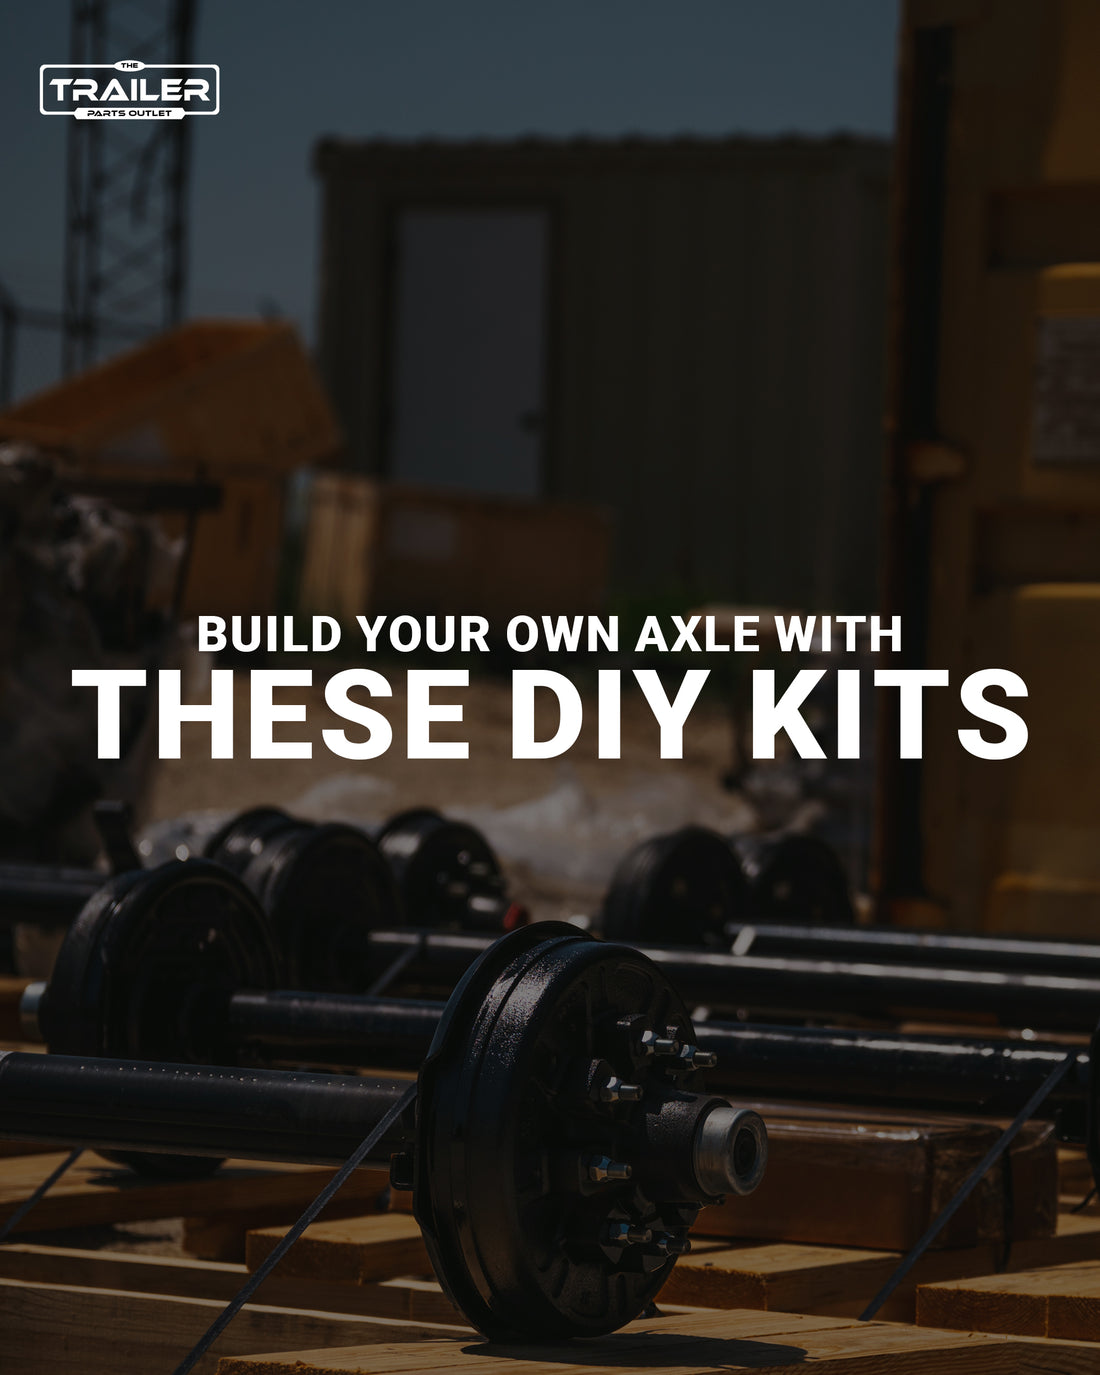 Build Your Own Axle with These DIY Kits